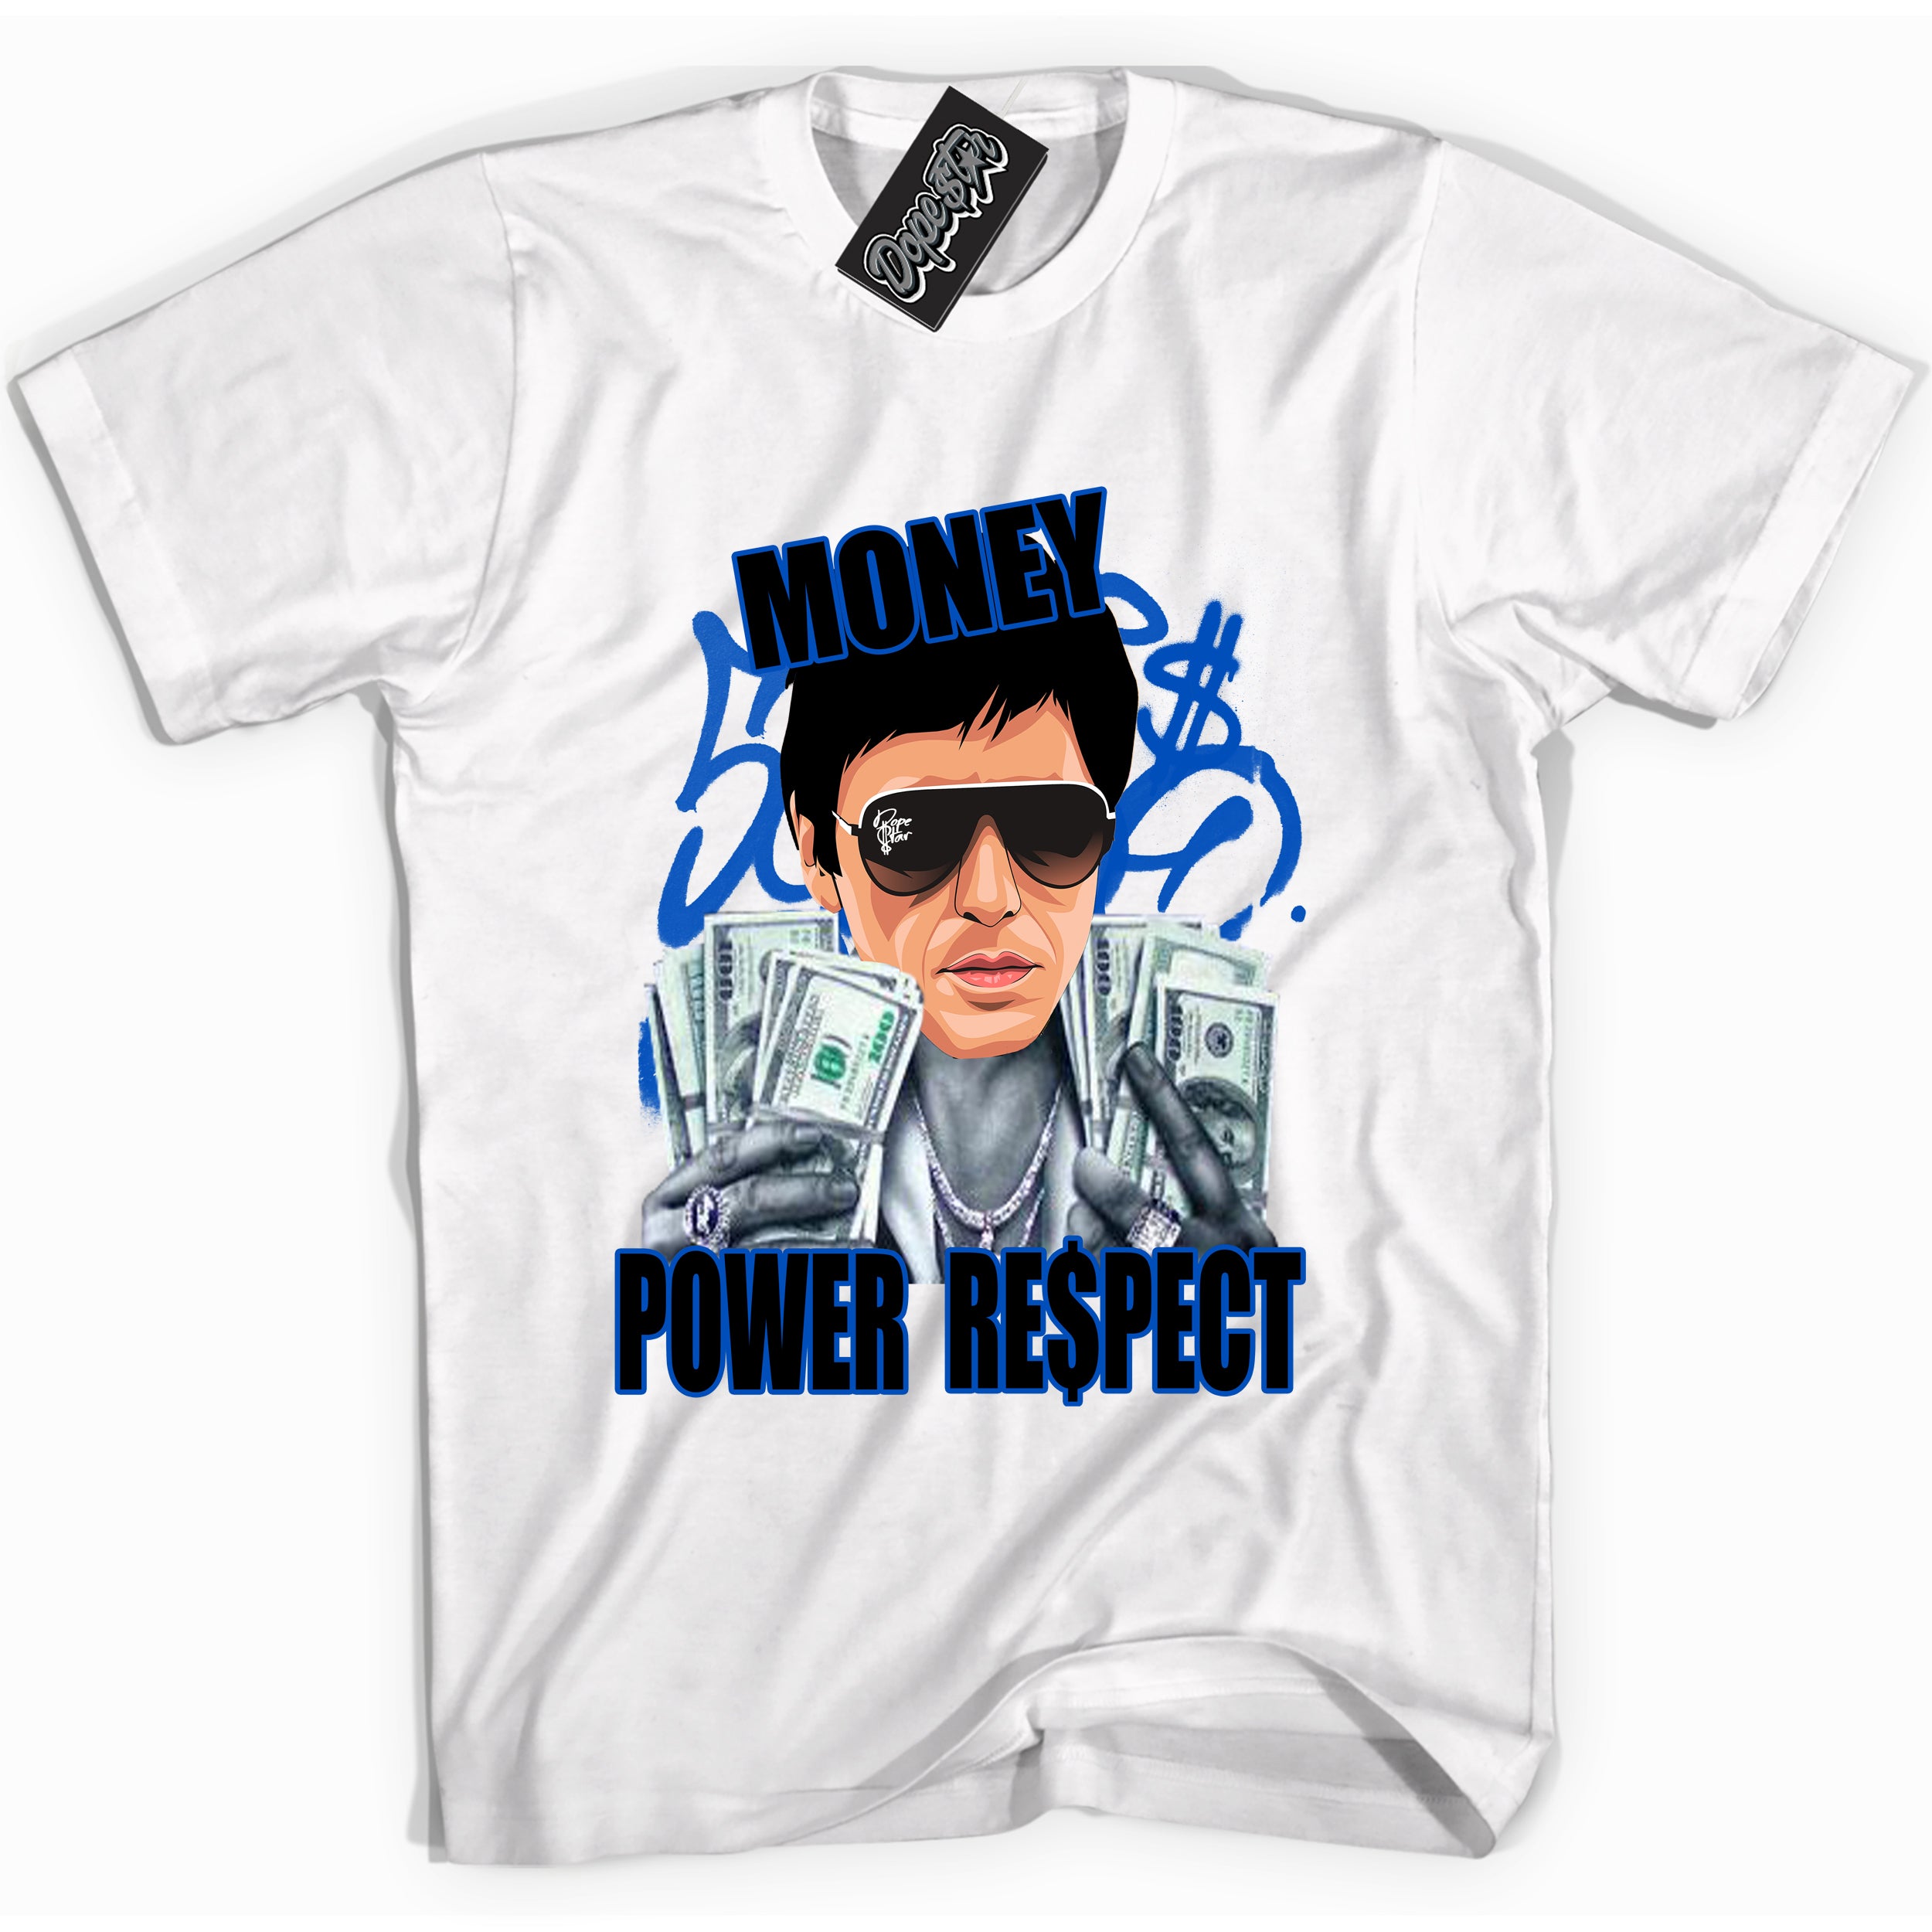 Cool White graphic tee with Tony Montana print, that perfectly matches OG Royal Reimagined 1s sneakers 